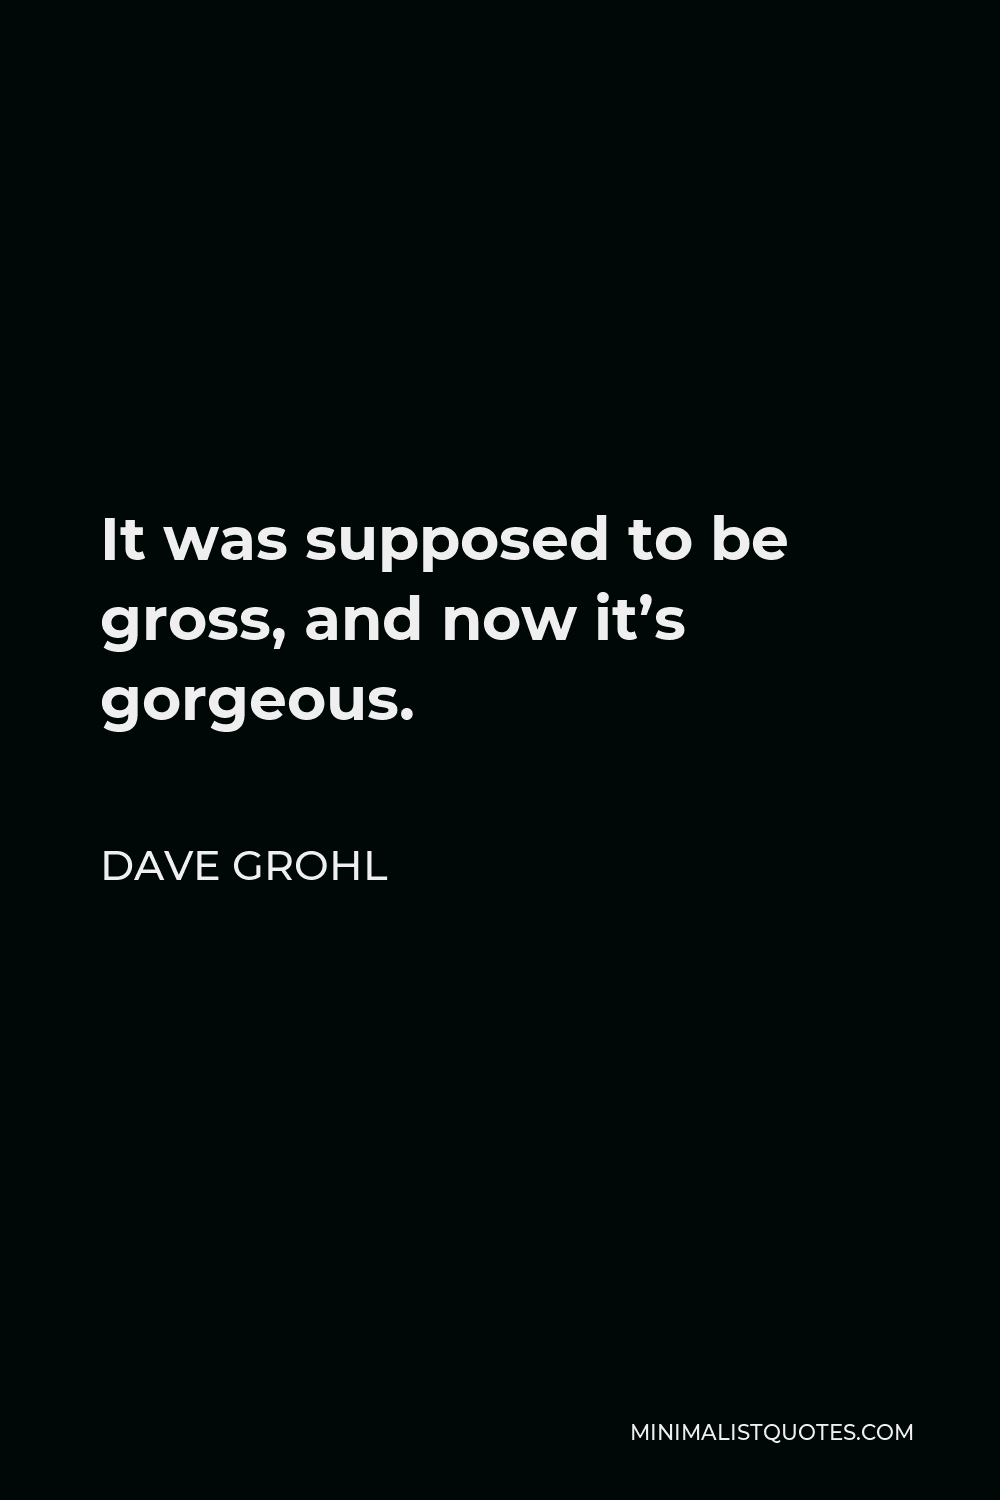 Dave Grohl Quote - It was supposed to be gross, and now it’s gorgeous.